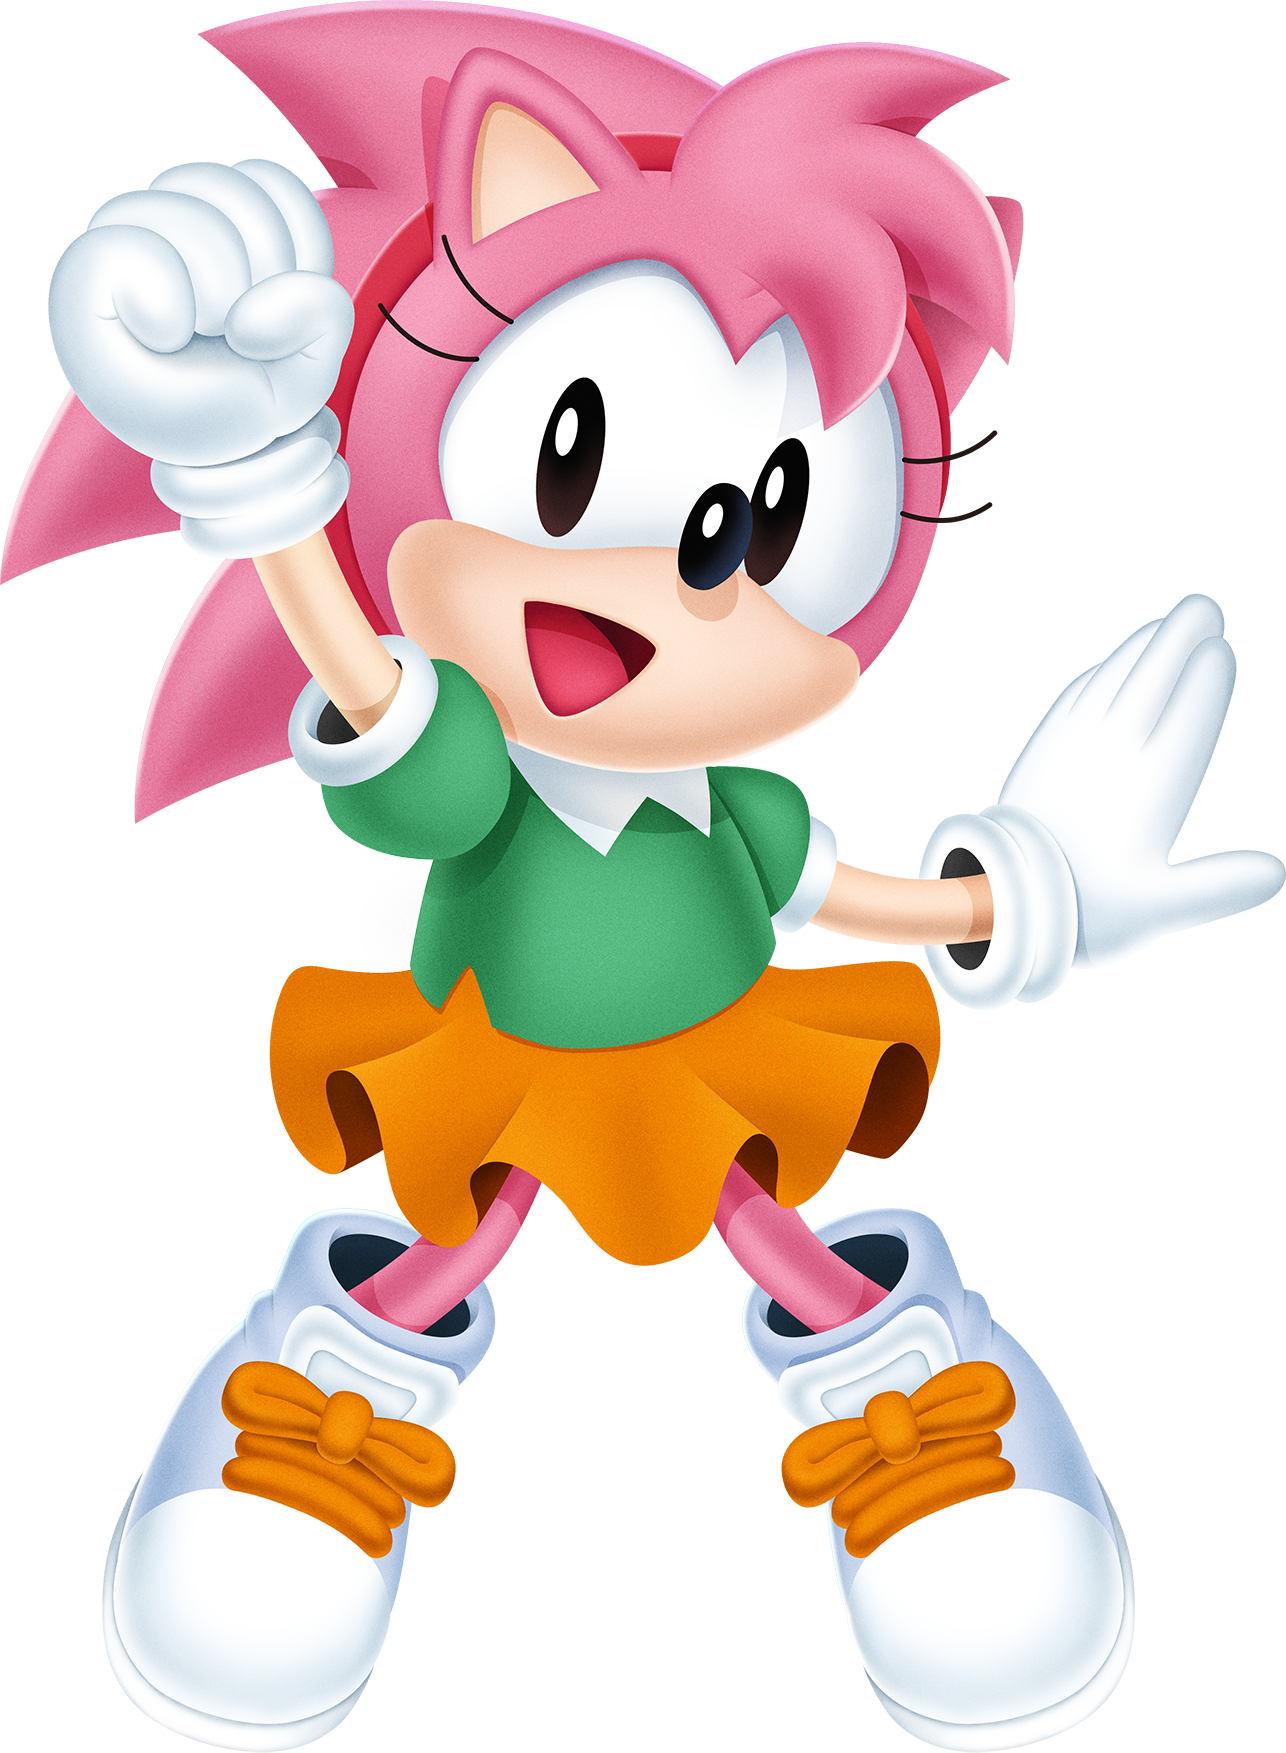 To celebrate Sonic Origins, here's a render of Classic Sonic! More